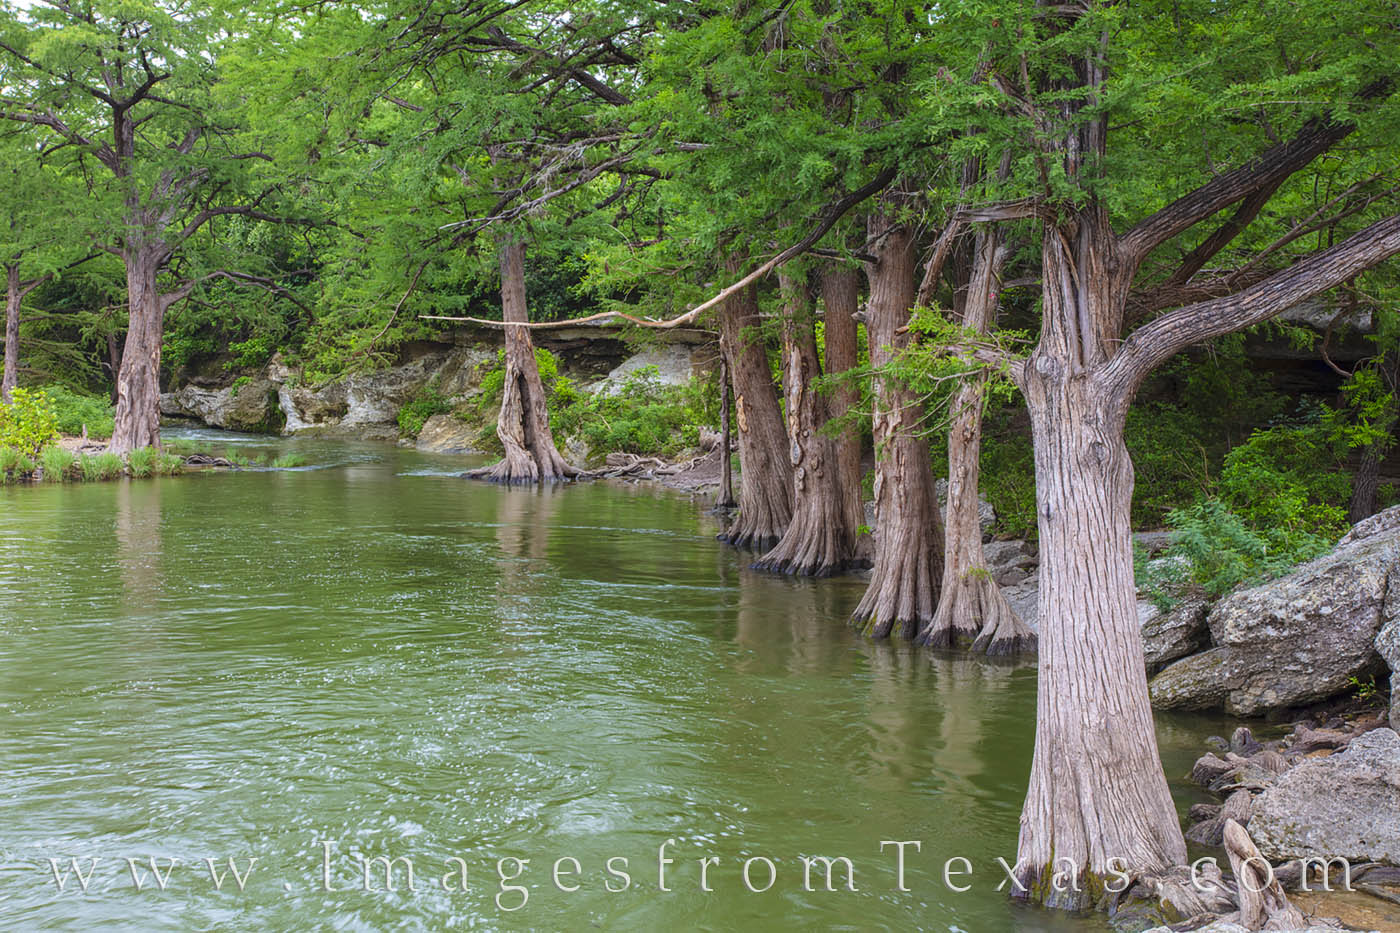 Onion Creek flows through McKinney Falls beneath the aged trunks of tall cypress. Two waterfalls highlight this area - the Upper...